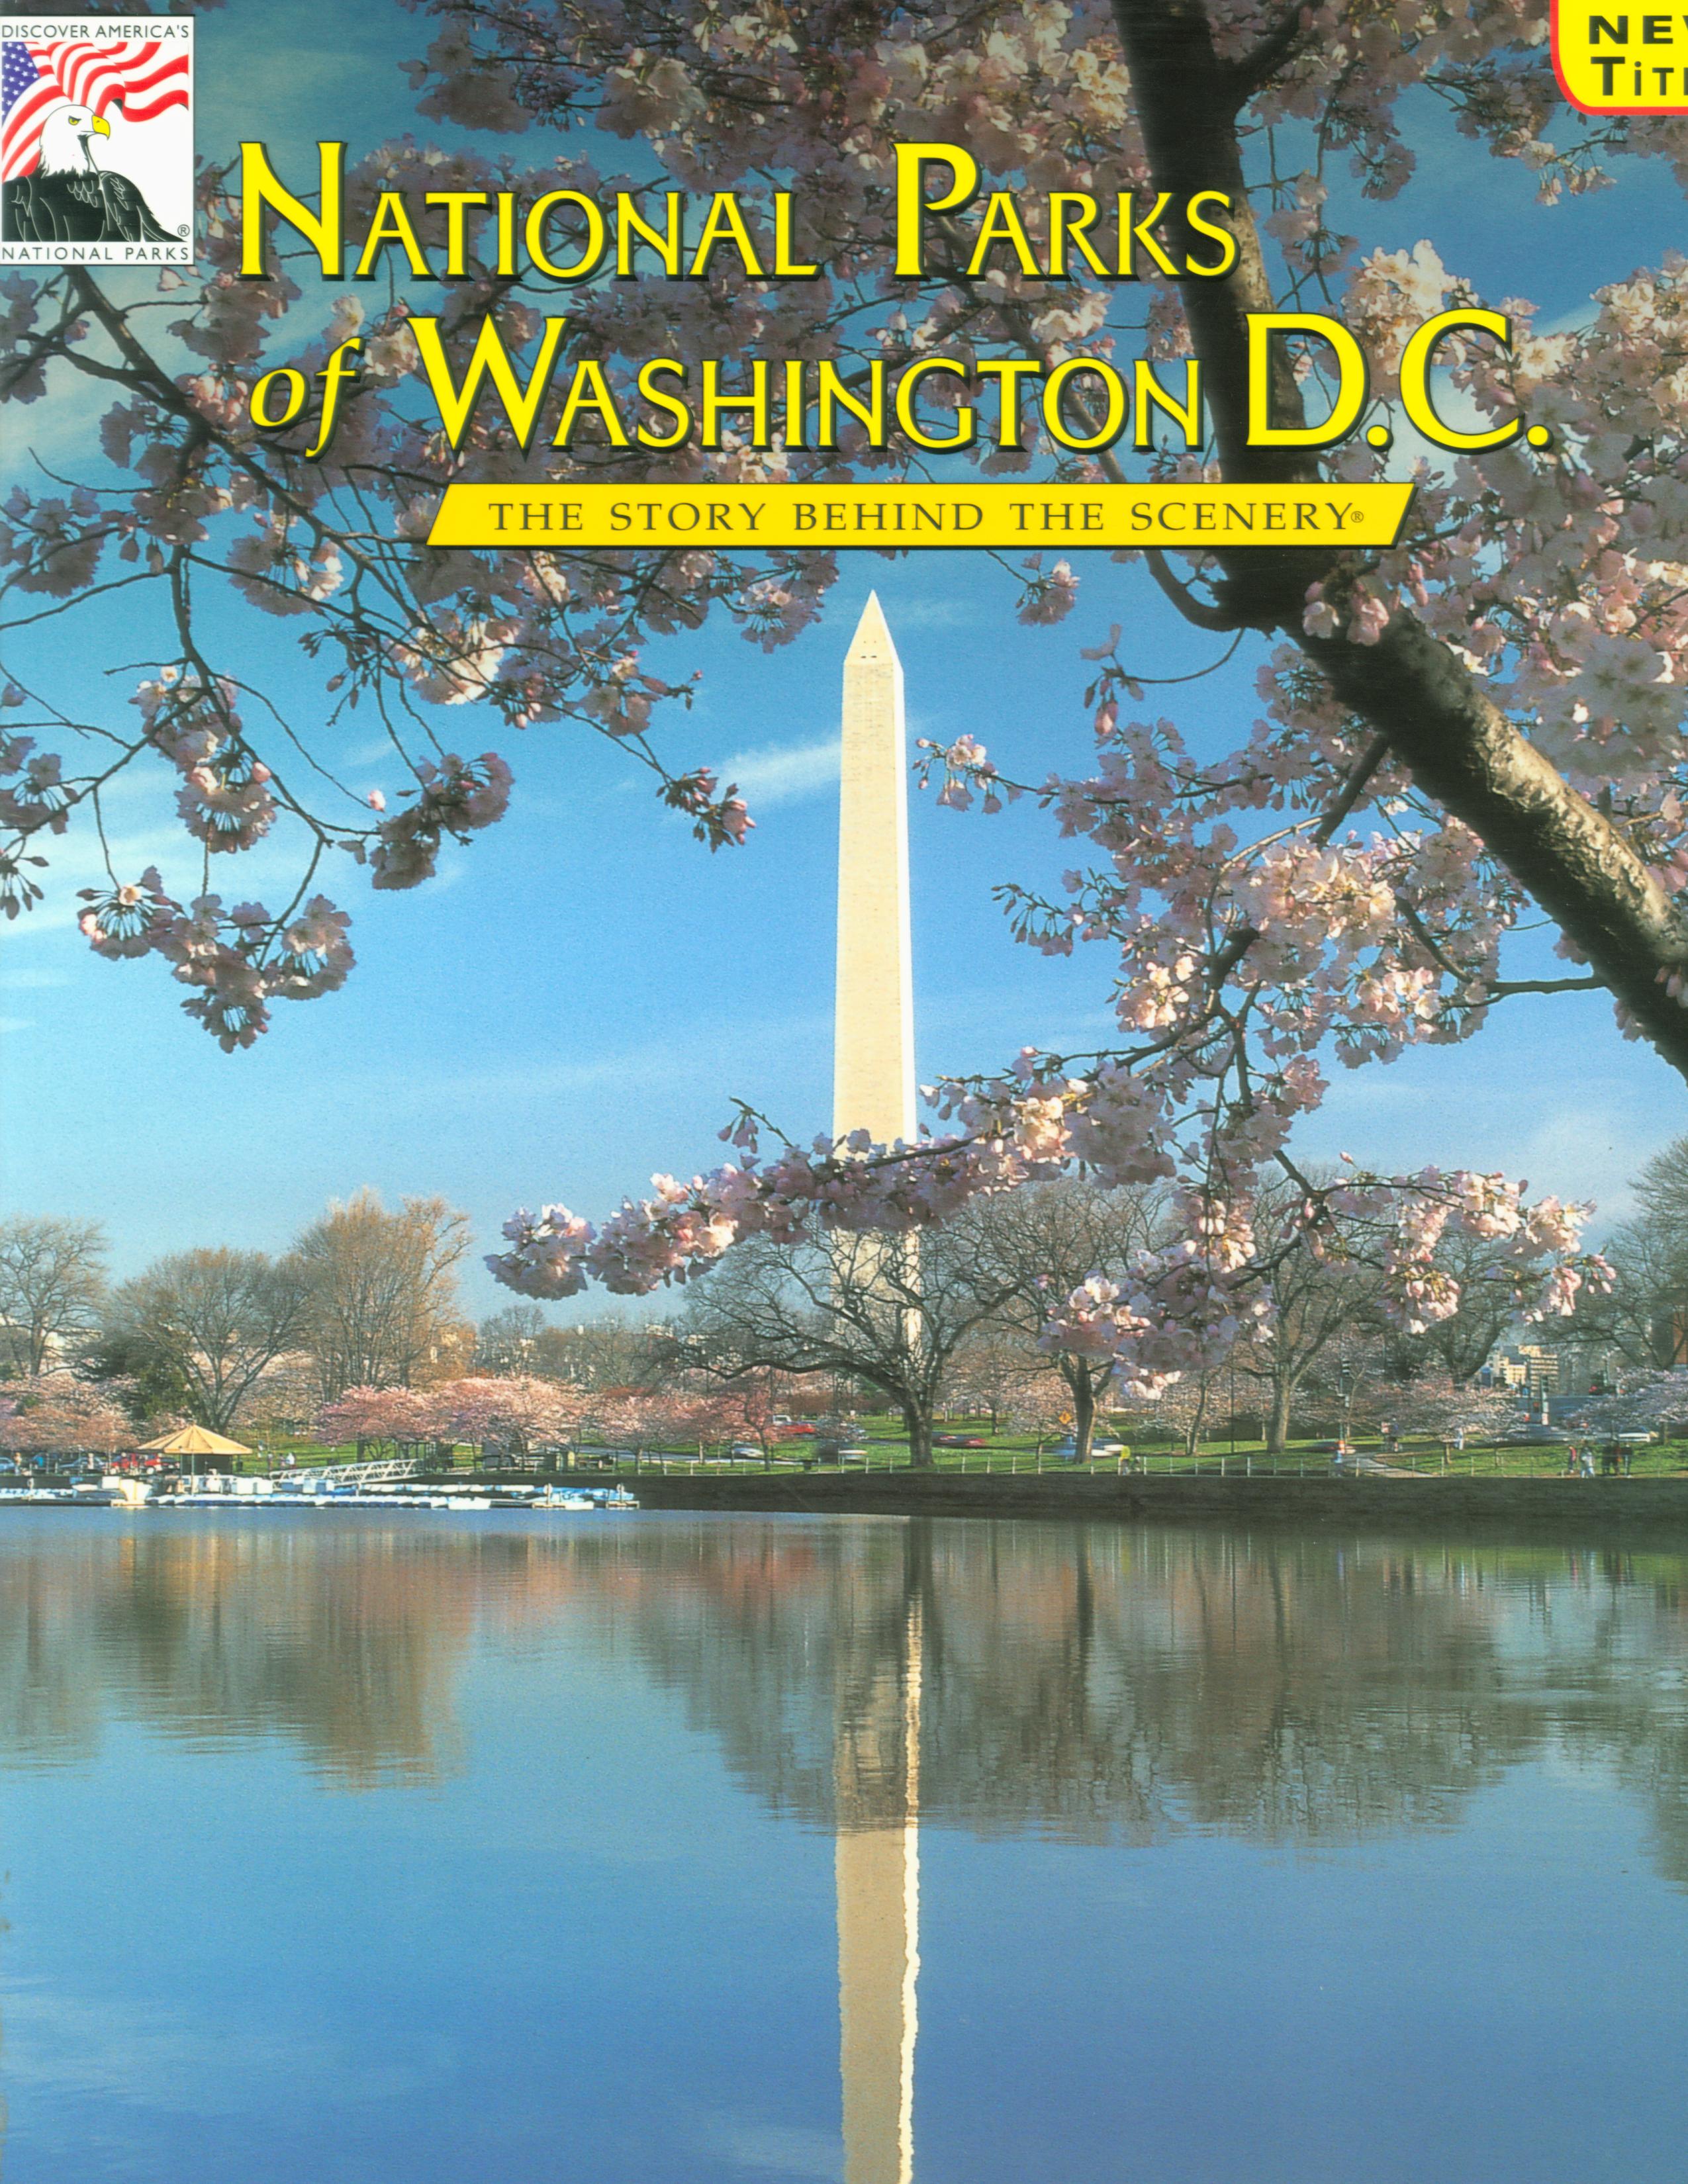 NATIONAL PARKS OF WASHINGTON, D.C.: the story behind the scenery (DC).